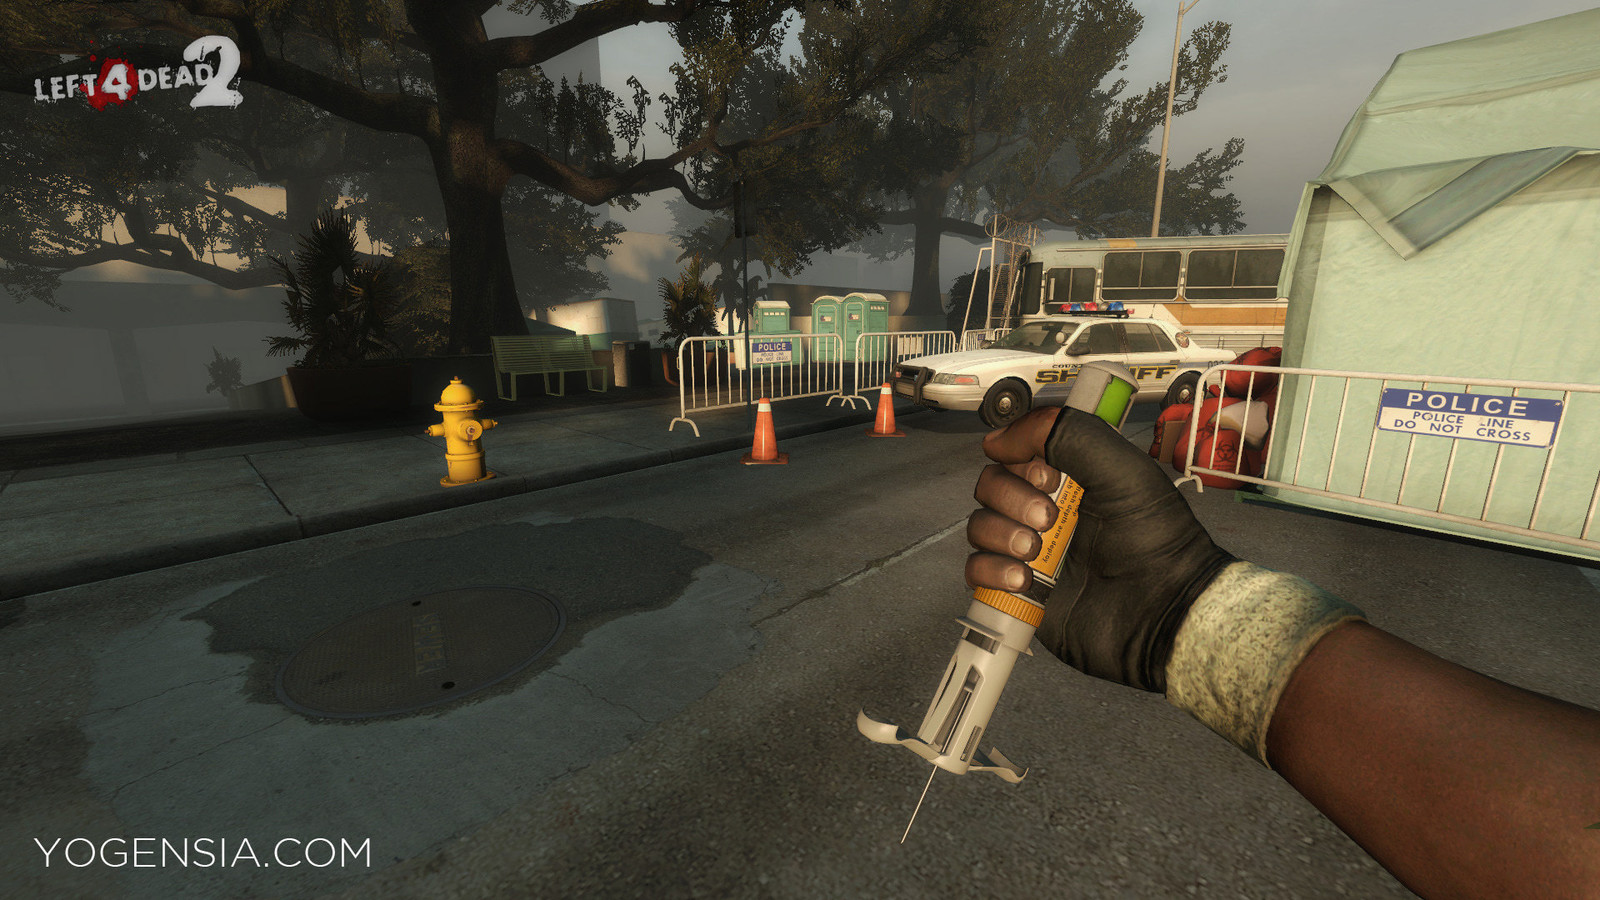 Left 4 Dead 2 Screenshot (with PBR textures "corrected" to fit the engine)